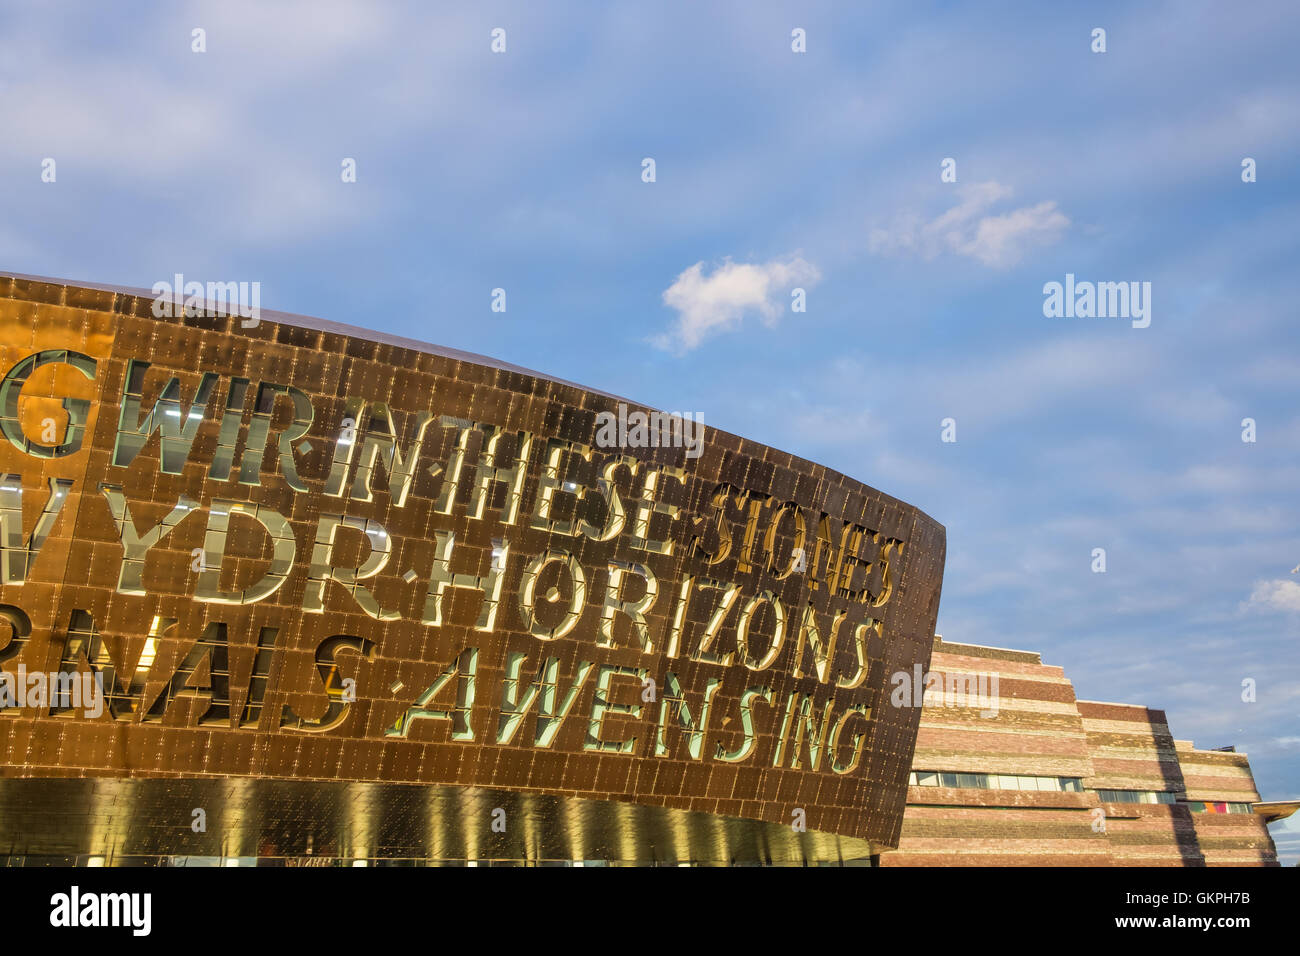 Wales Millennium Centre in the former docks area of Cardiff, Wales Stock Photo